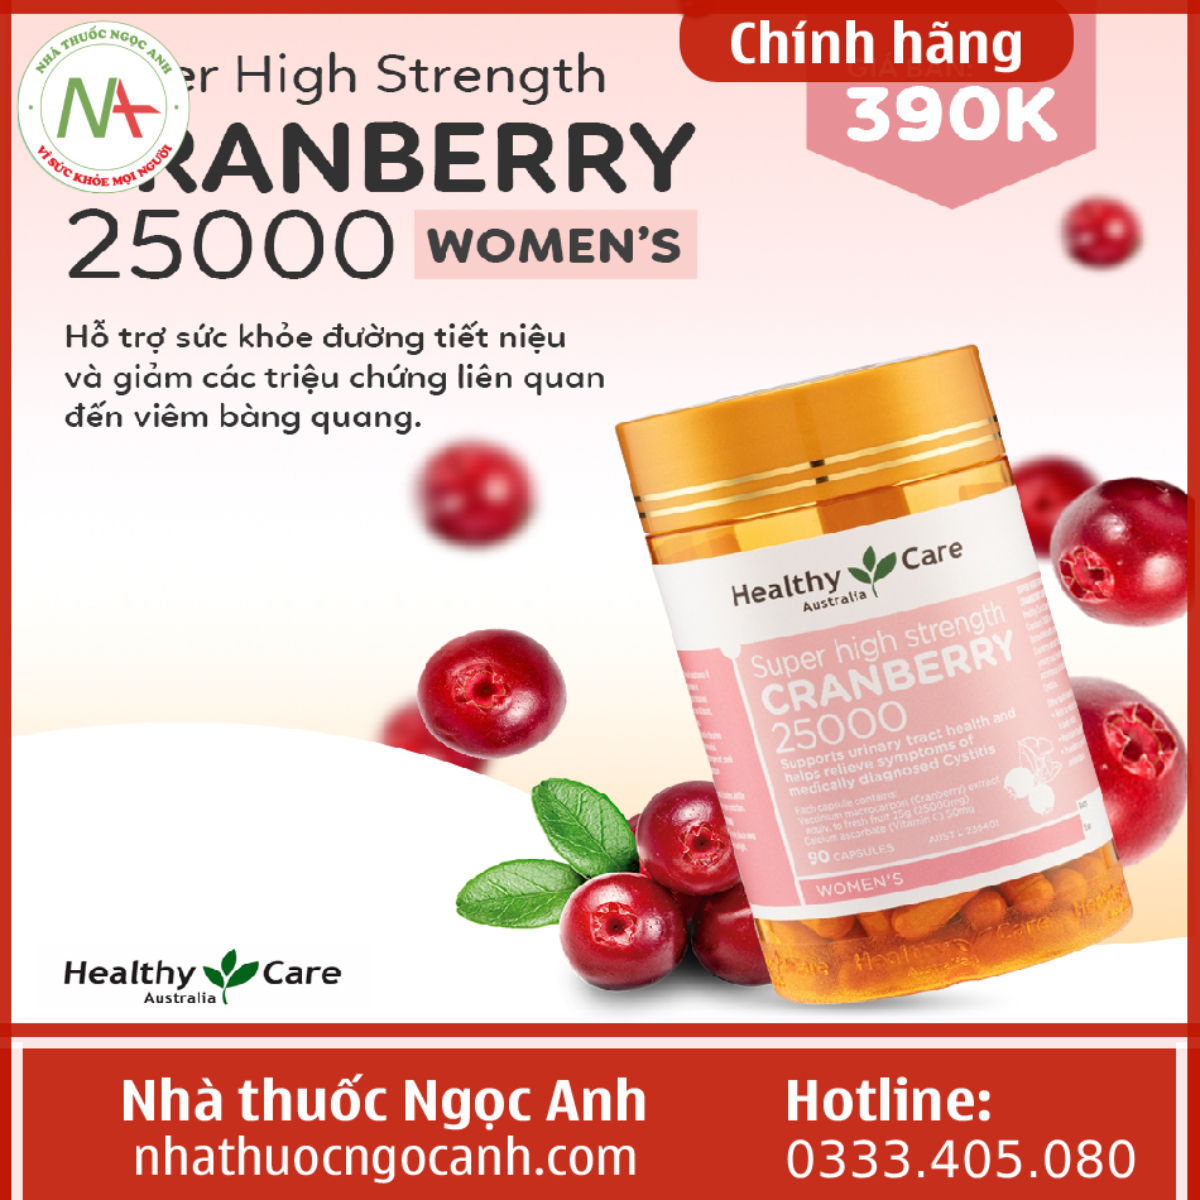 Cranberry 25000mg Healthy Care